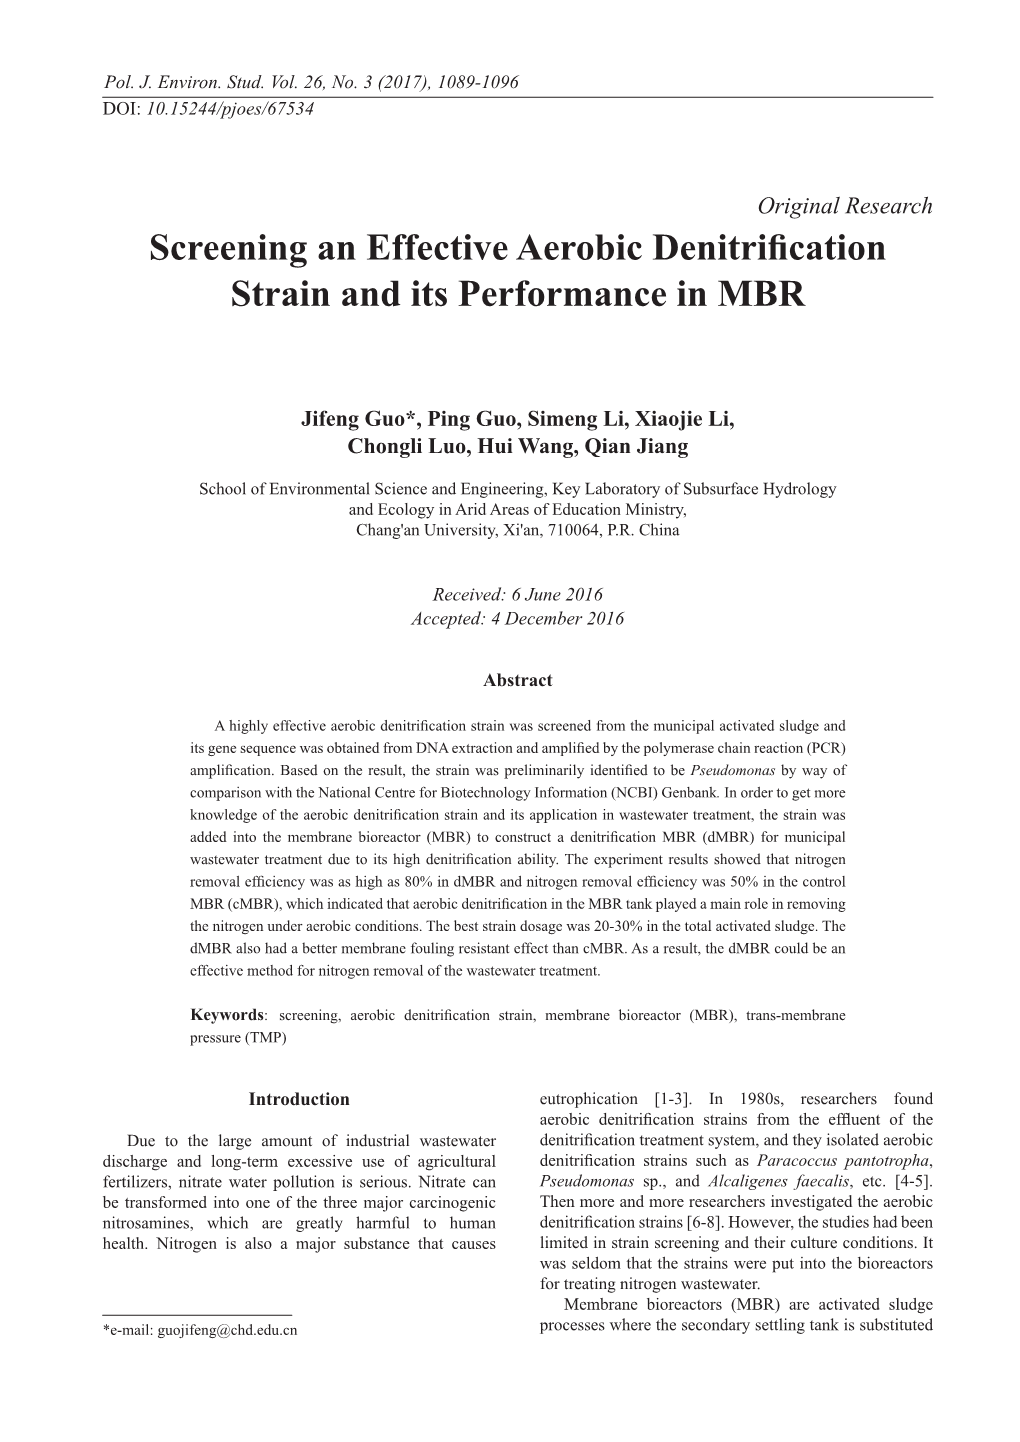 Screening an Effective Aerobic Denitrification Strain and Its Performance in MBR